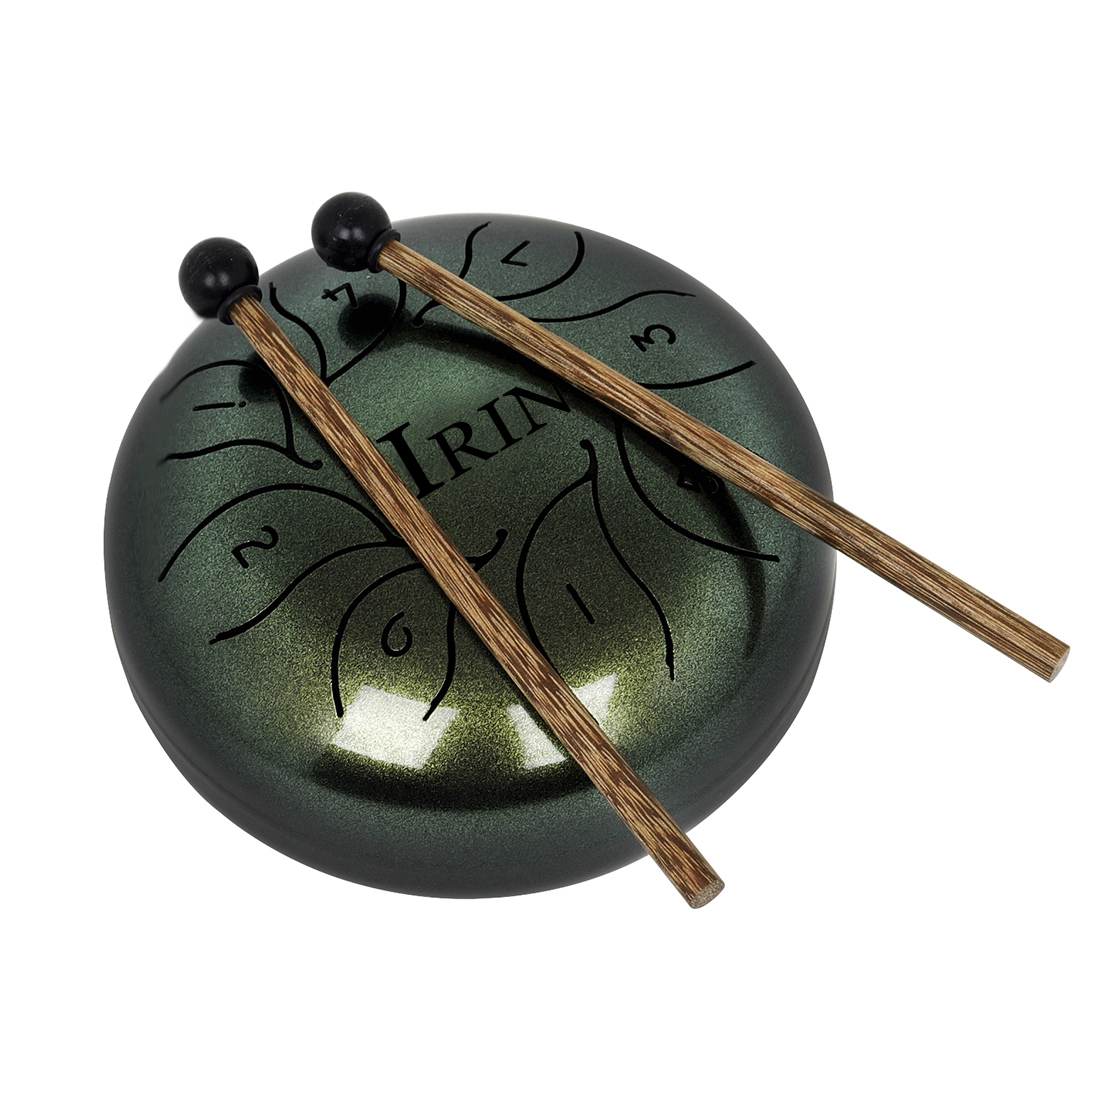 IRIN 5.5 Inch 8 Notes G Tune Steel Tongue Drum Handpan Instrument with Drum Mallets and Bag